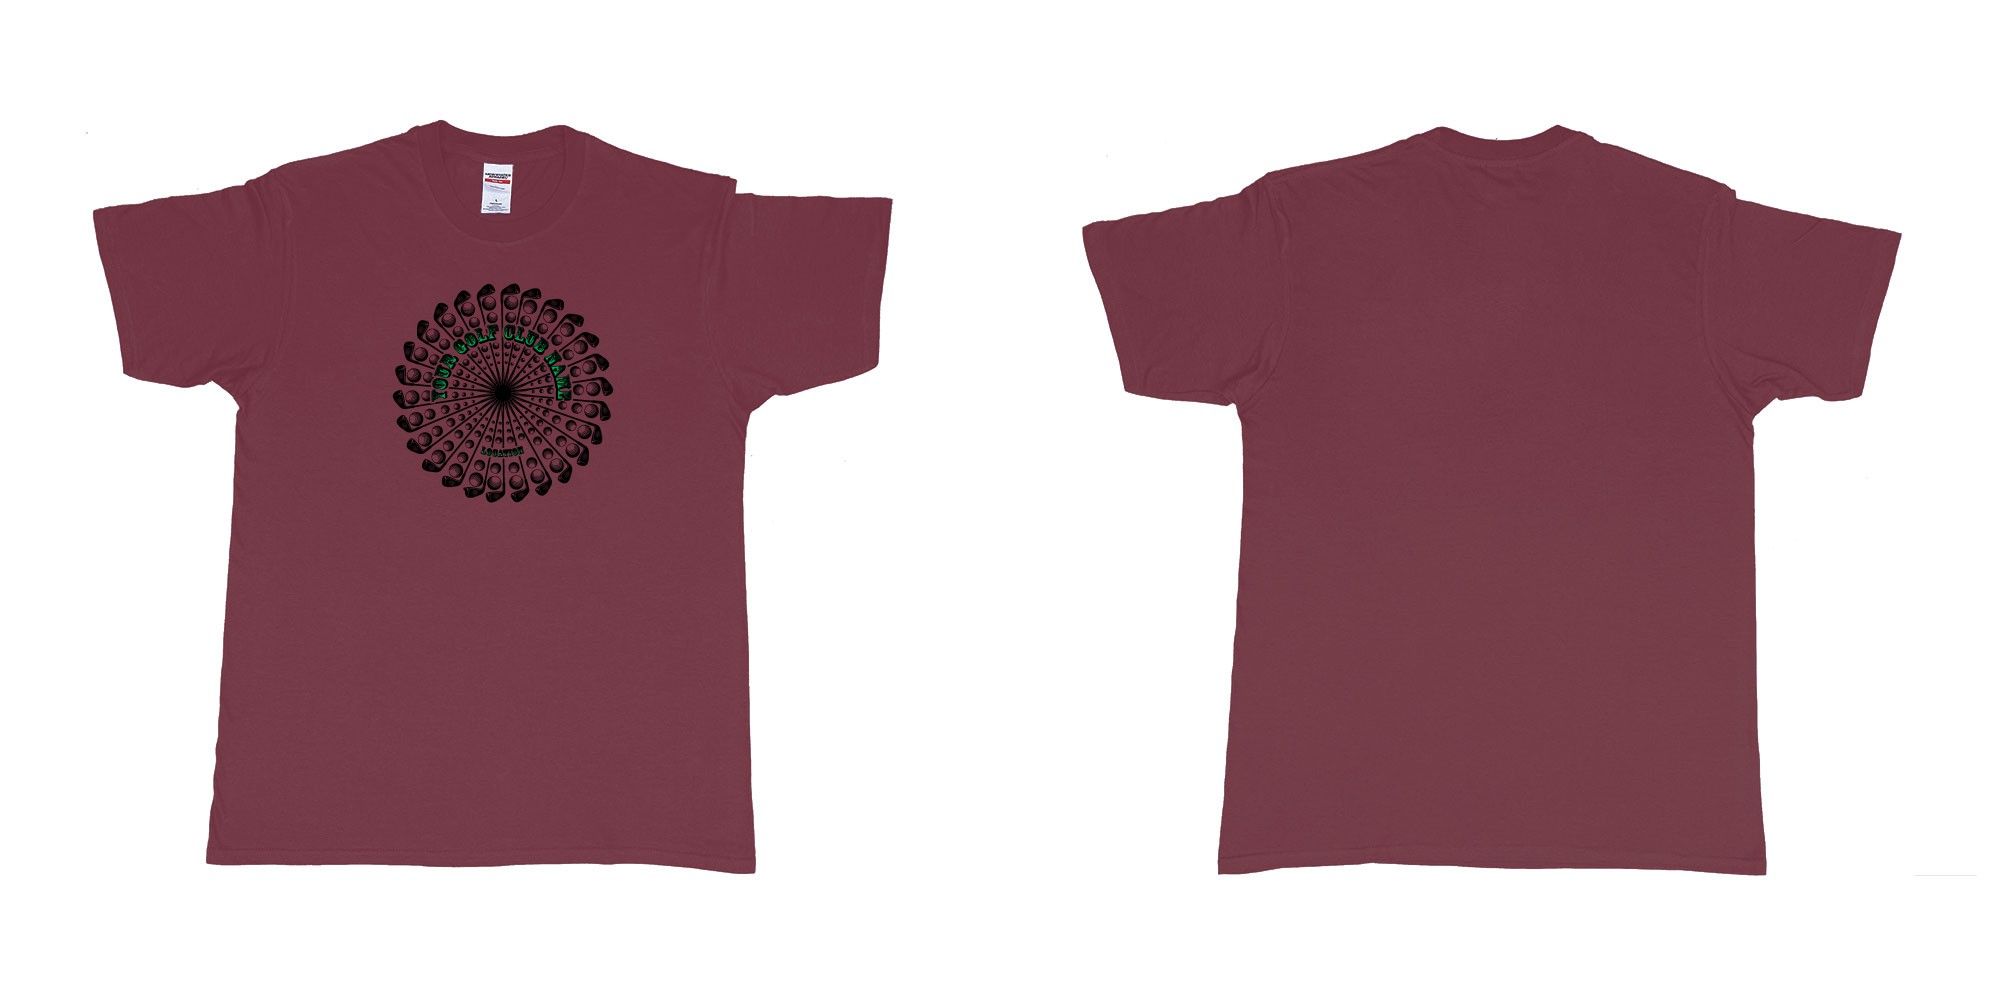 Custom tshirt design golf clubs balls mandala cutoms club name location in fabric color marron choice your own text made in Bali by The Pirate Way